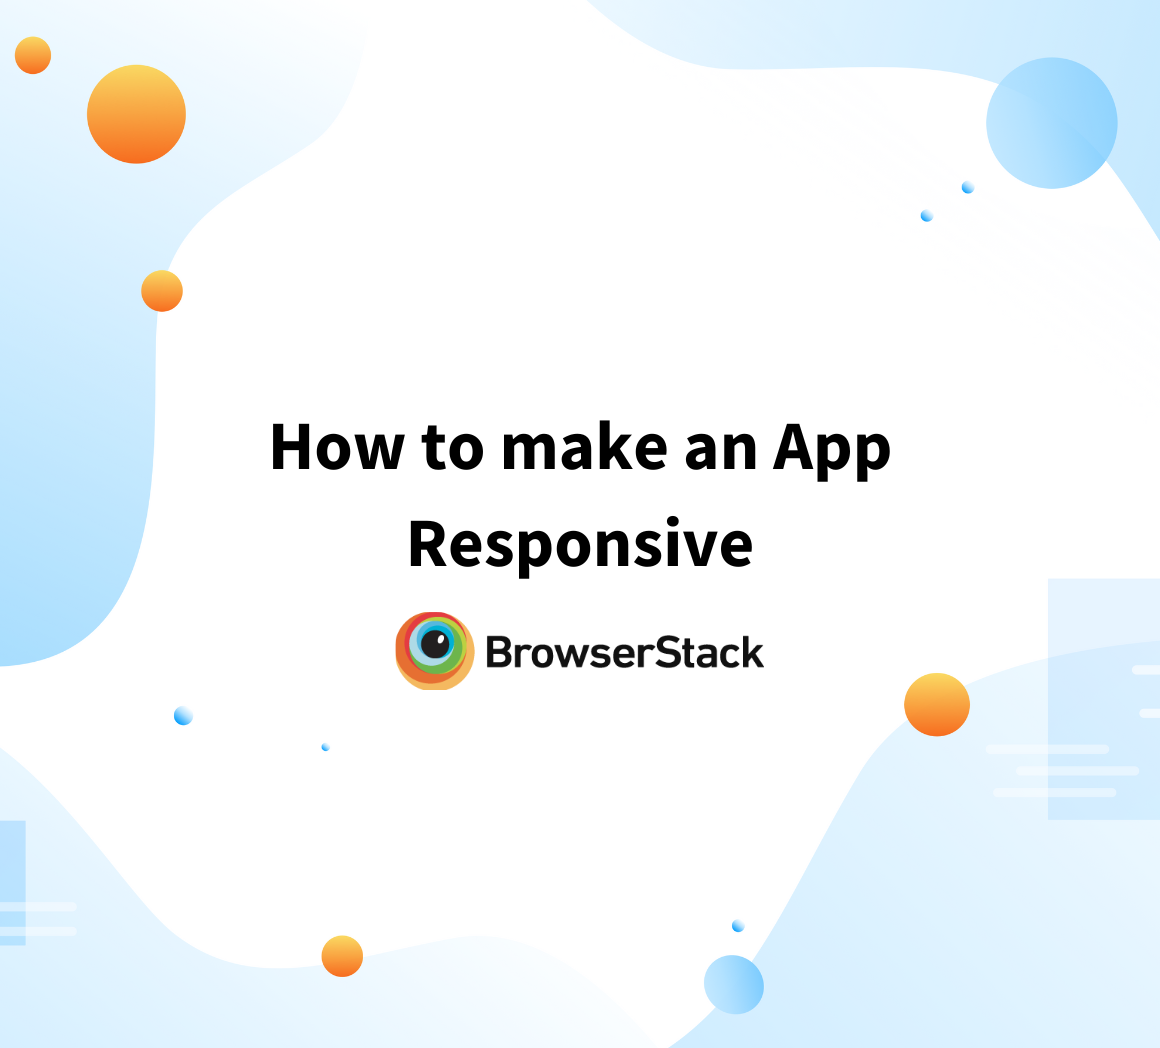 How to make an App Responsive